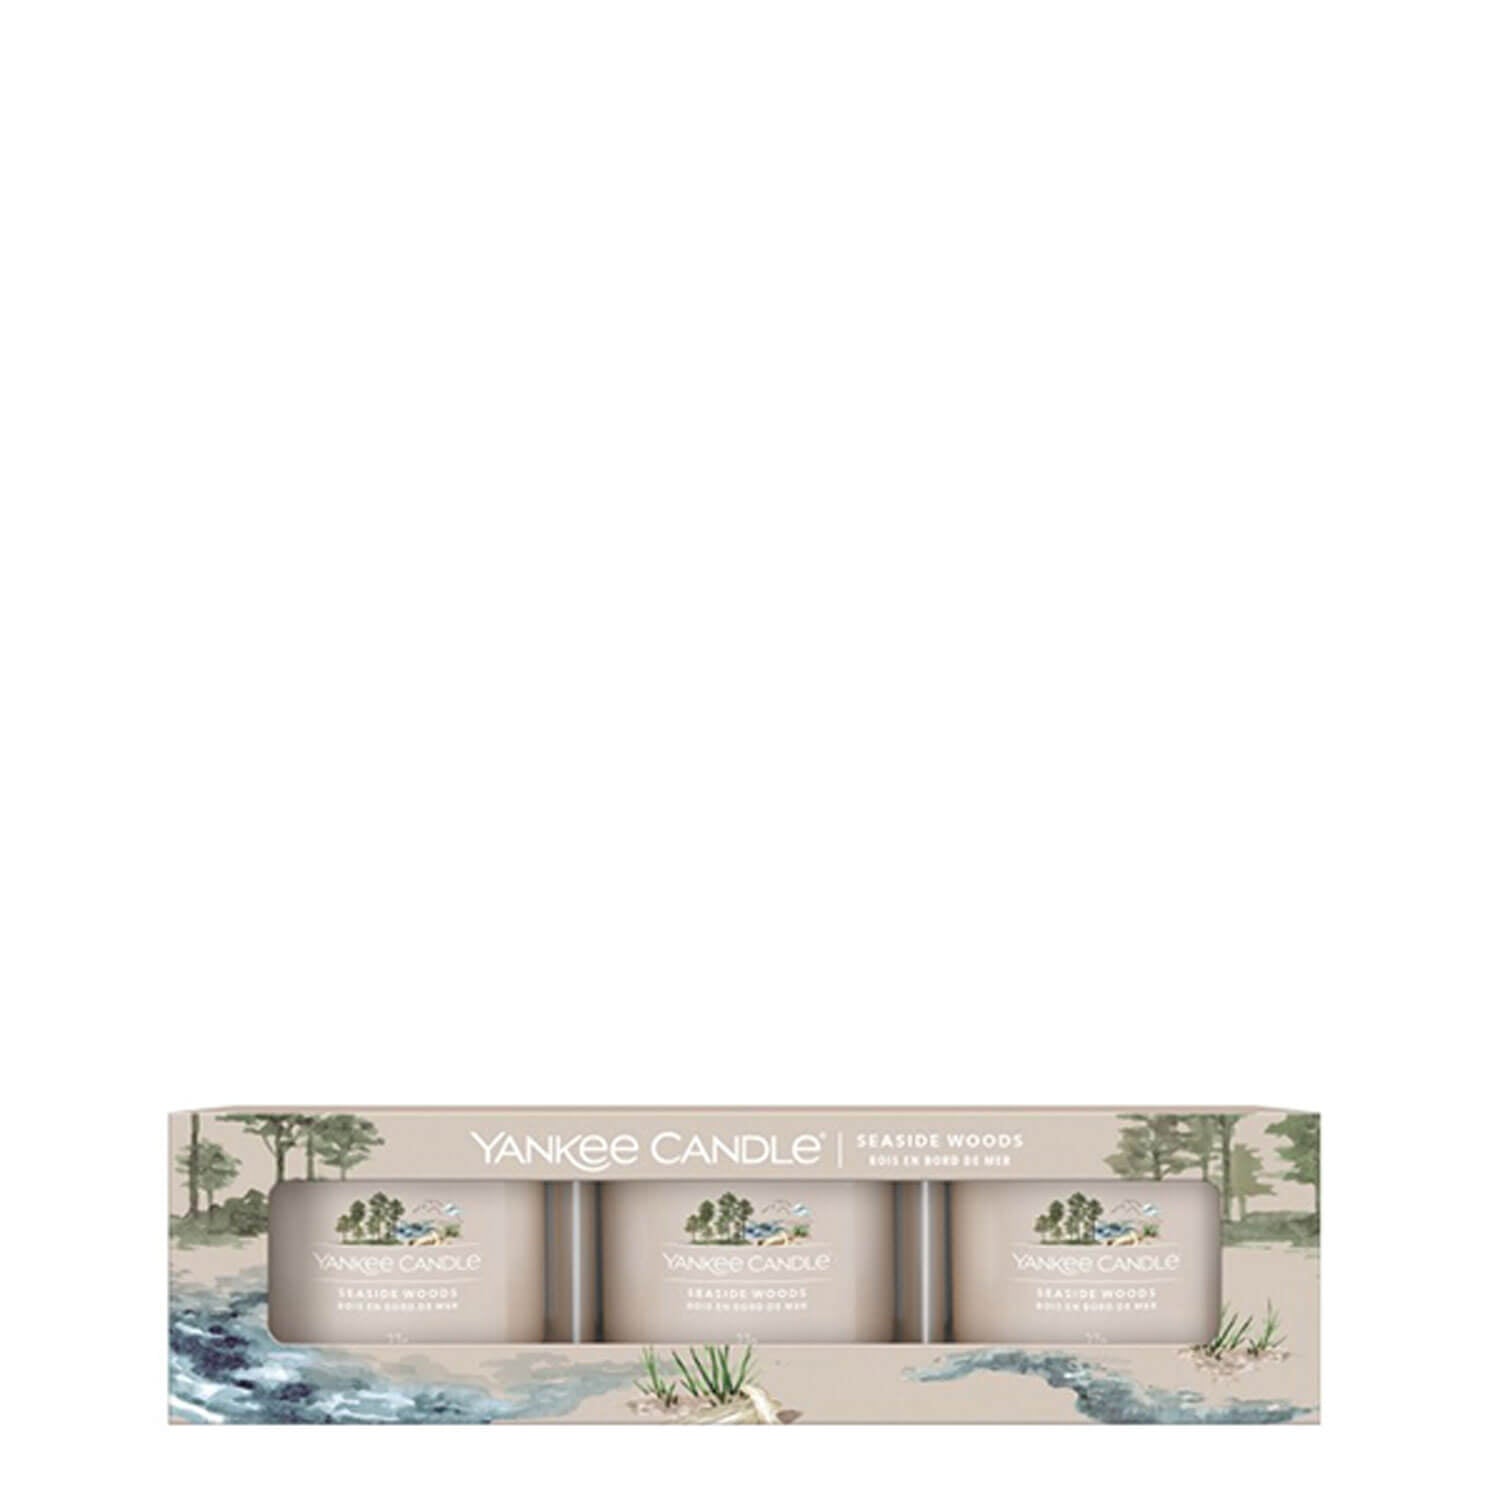 Yankee Candle Seaside Woods - 3 pack votive set 1 Shaws Department Stores